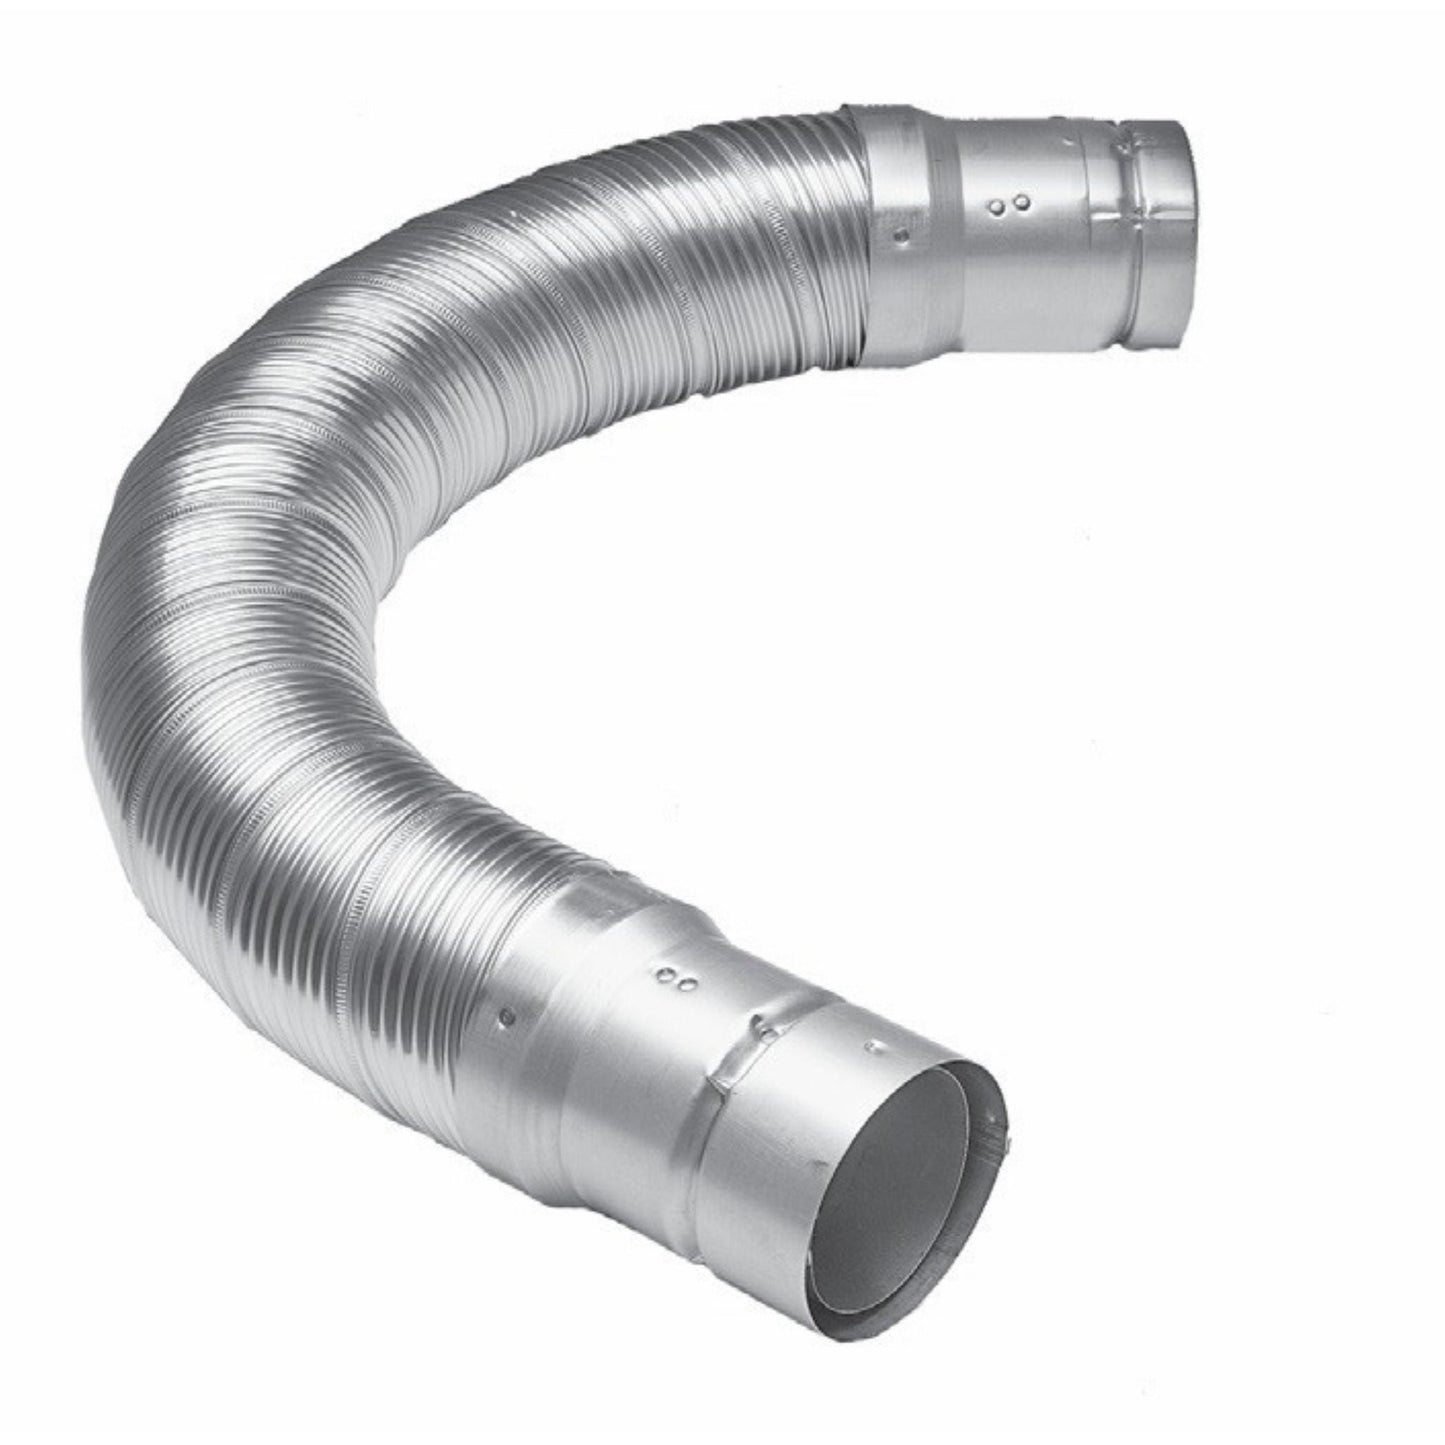 DuraVent DuraConnect II B-Vent 3" x 48" Flexible Double-Wall Gas Vent Connector